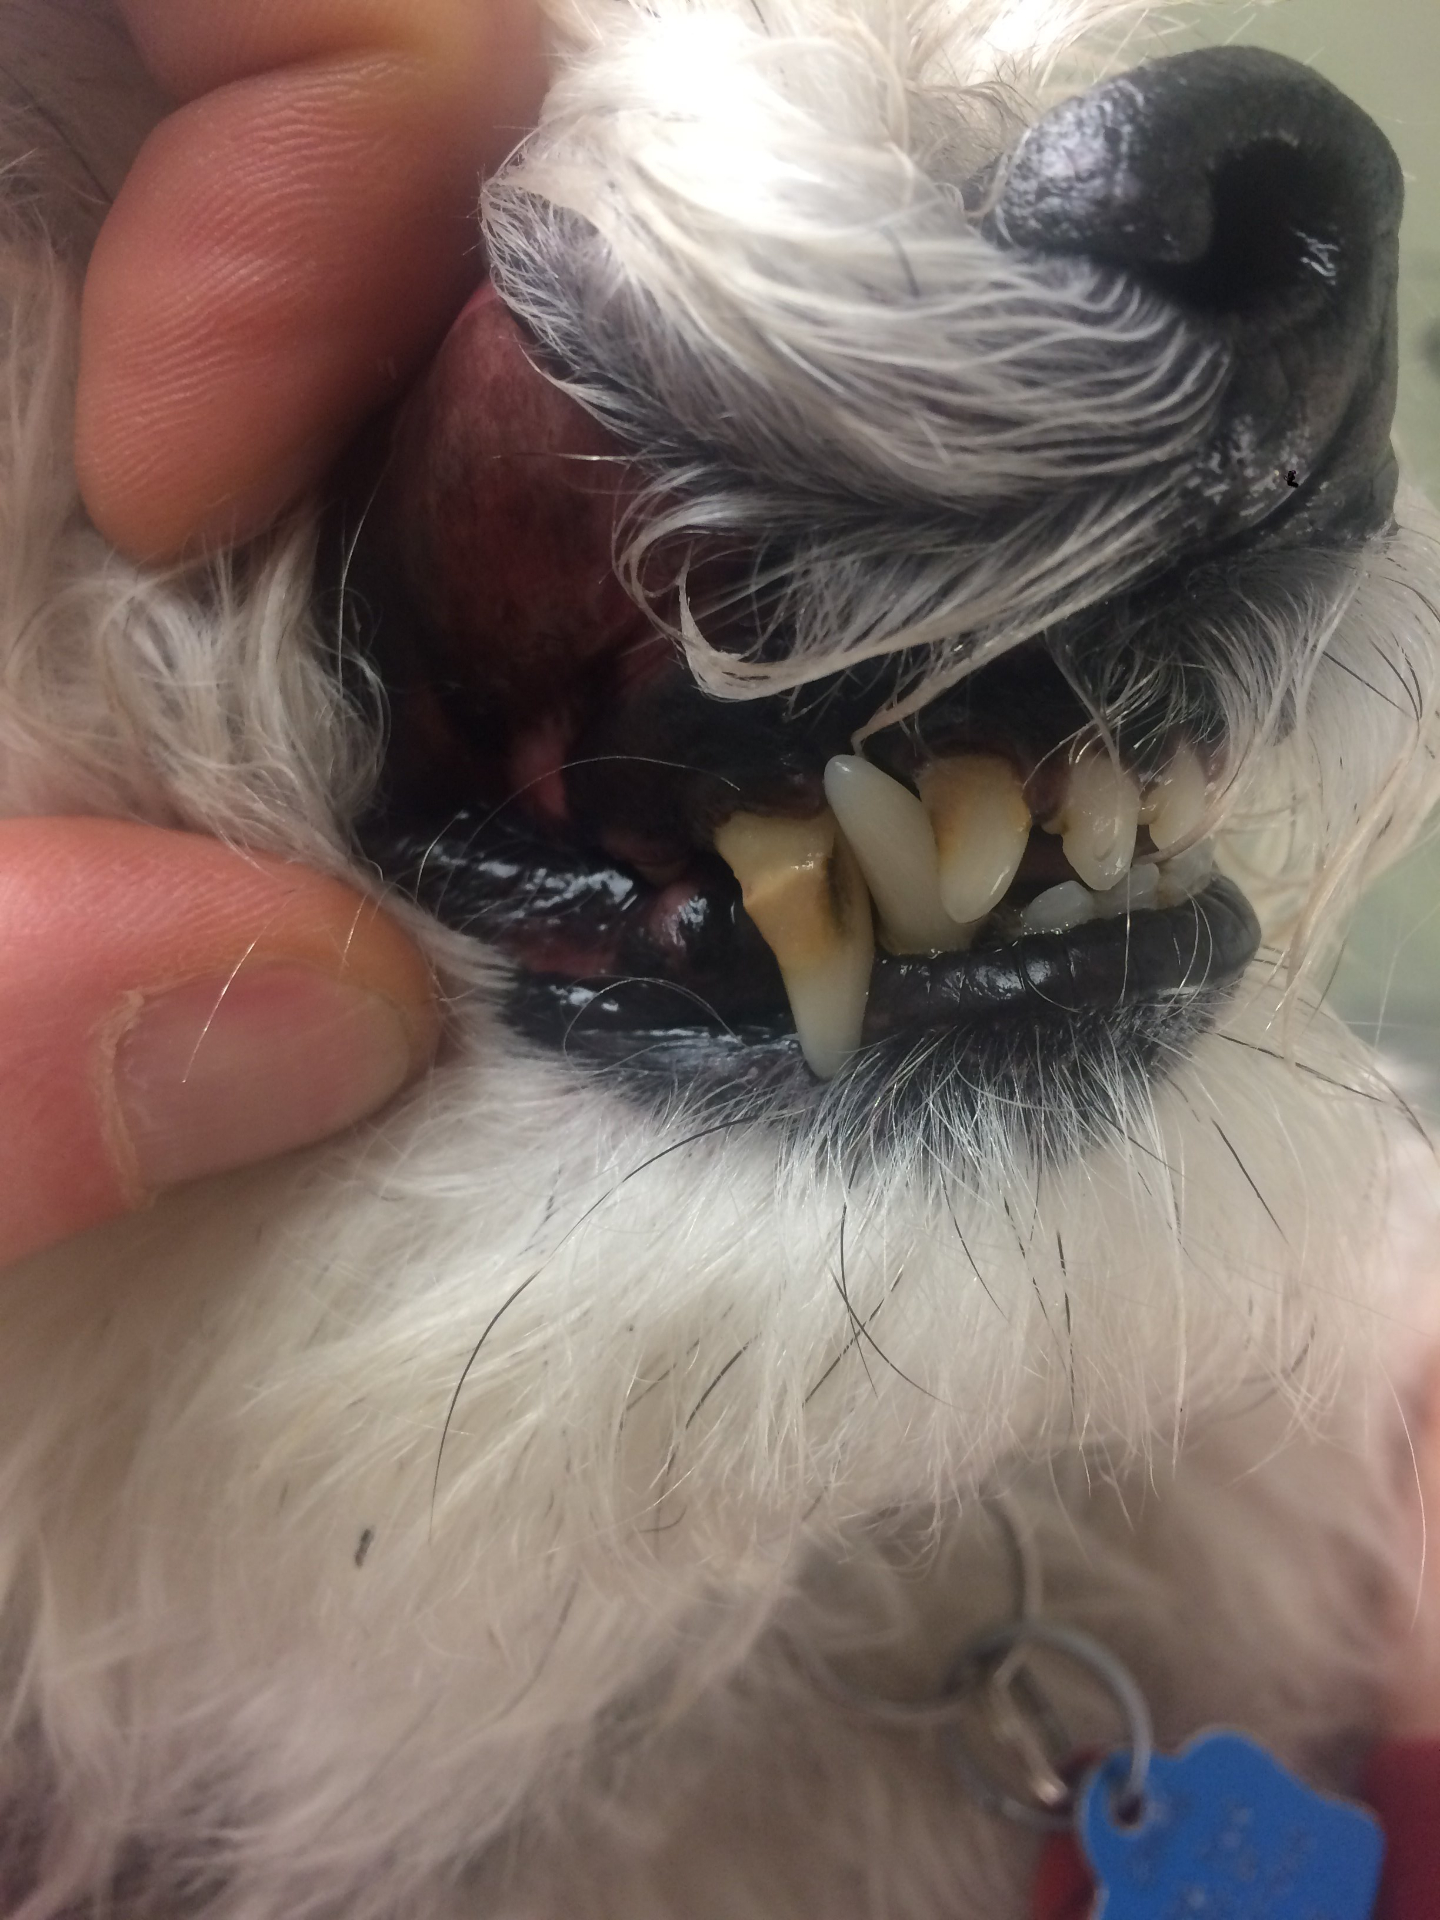 Upper incisor too far out not leaving room for lower canine.